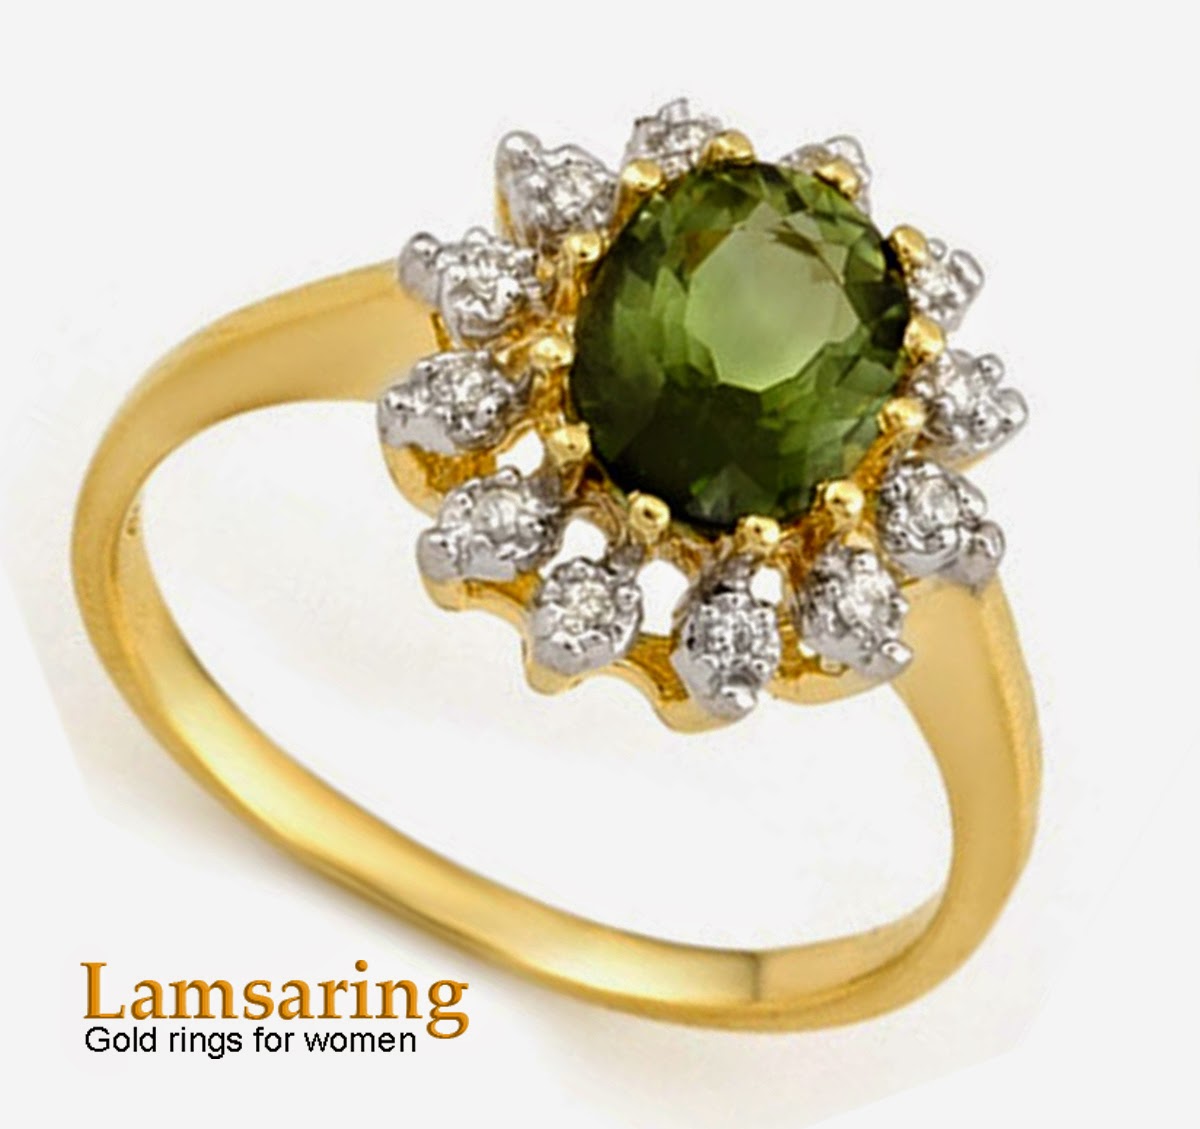 Green Gold Rings For Women Emerald Lamsaring Gold Rings For Women